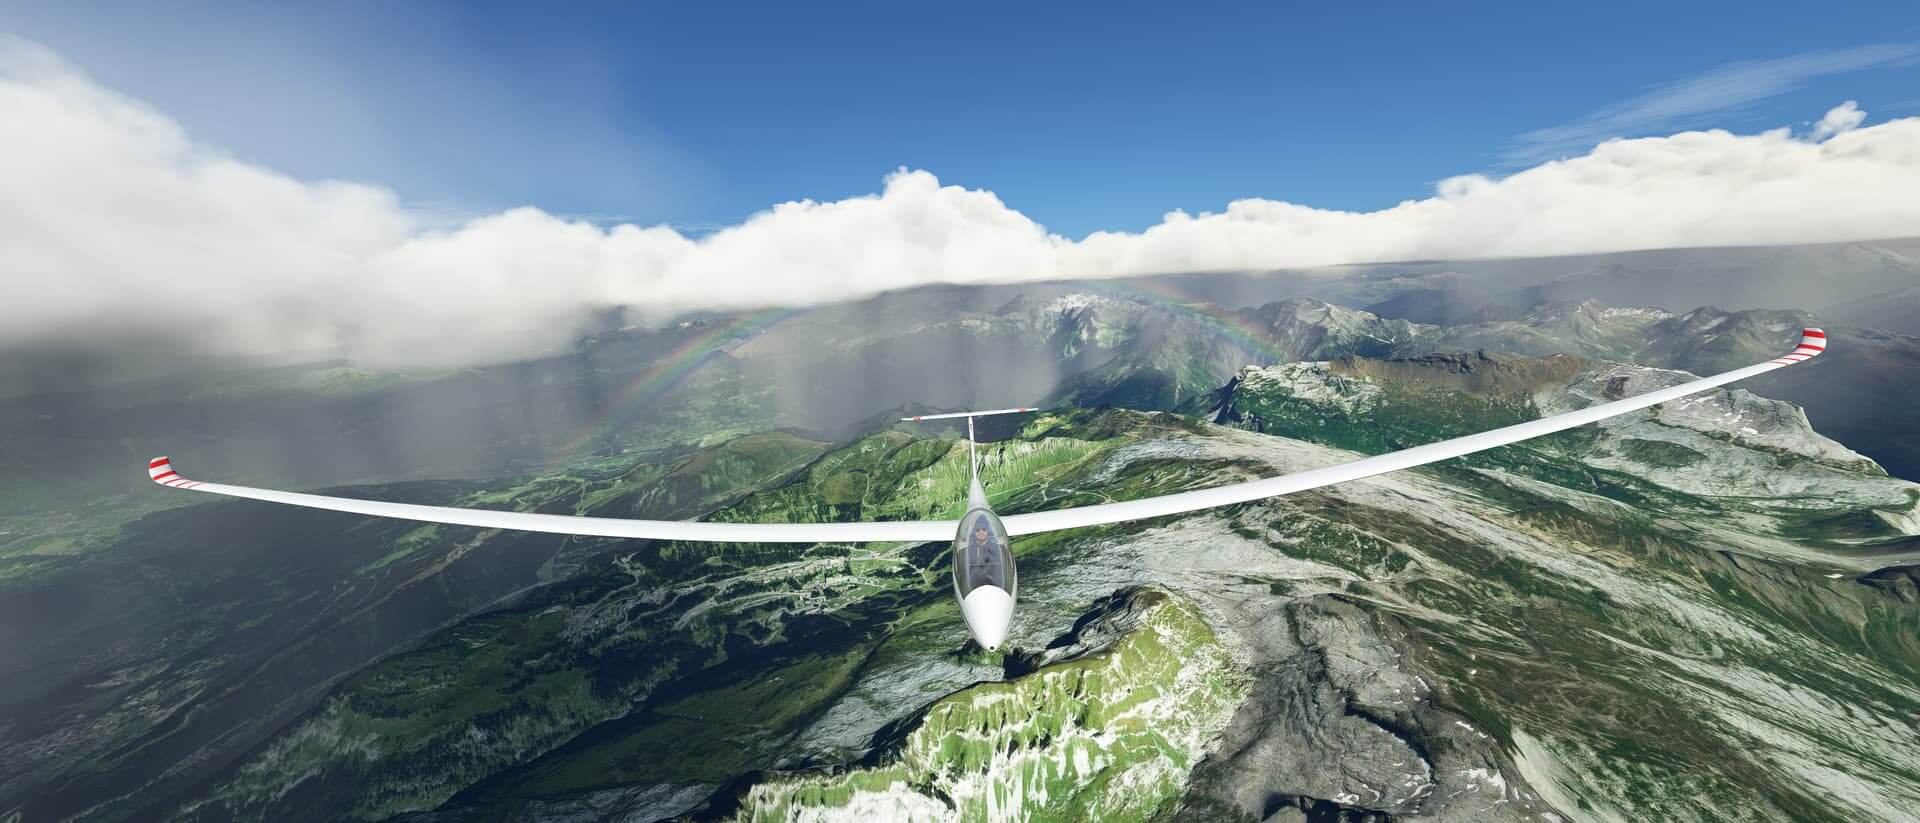 A glider soars above mountains with clouds and a rainbow behind.